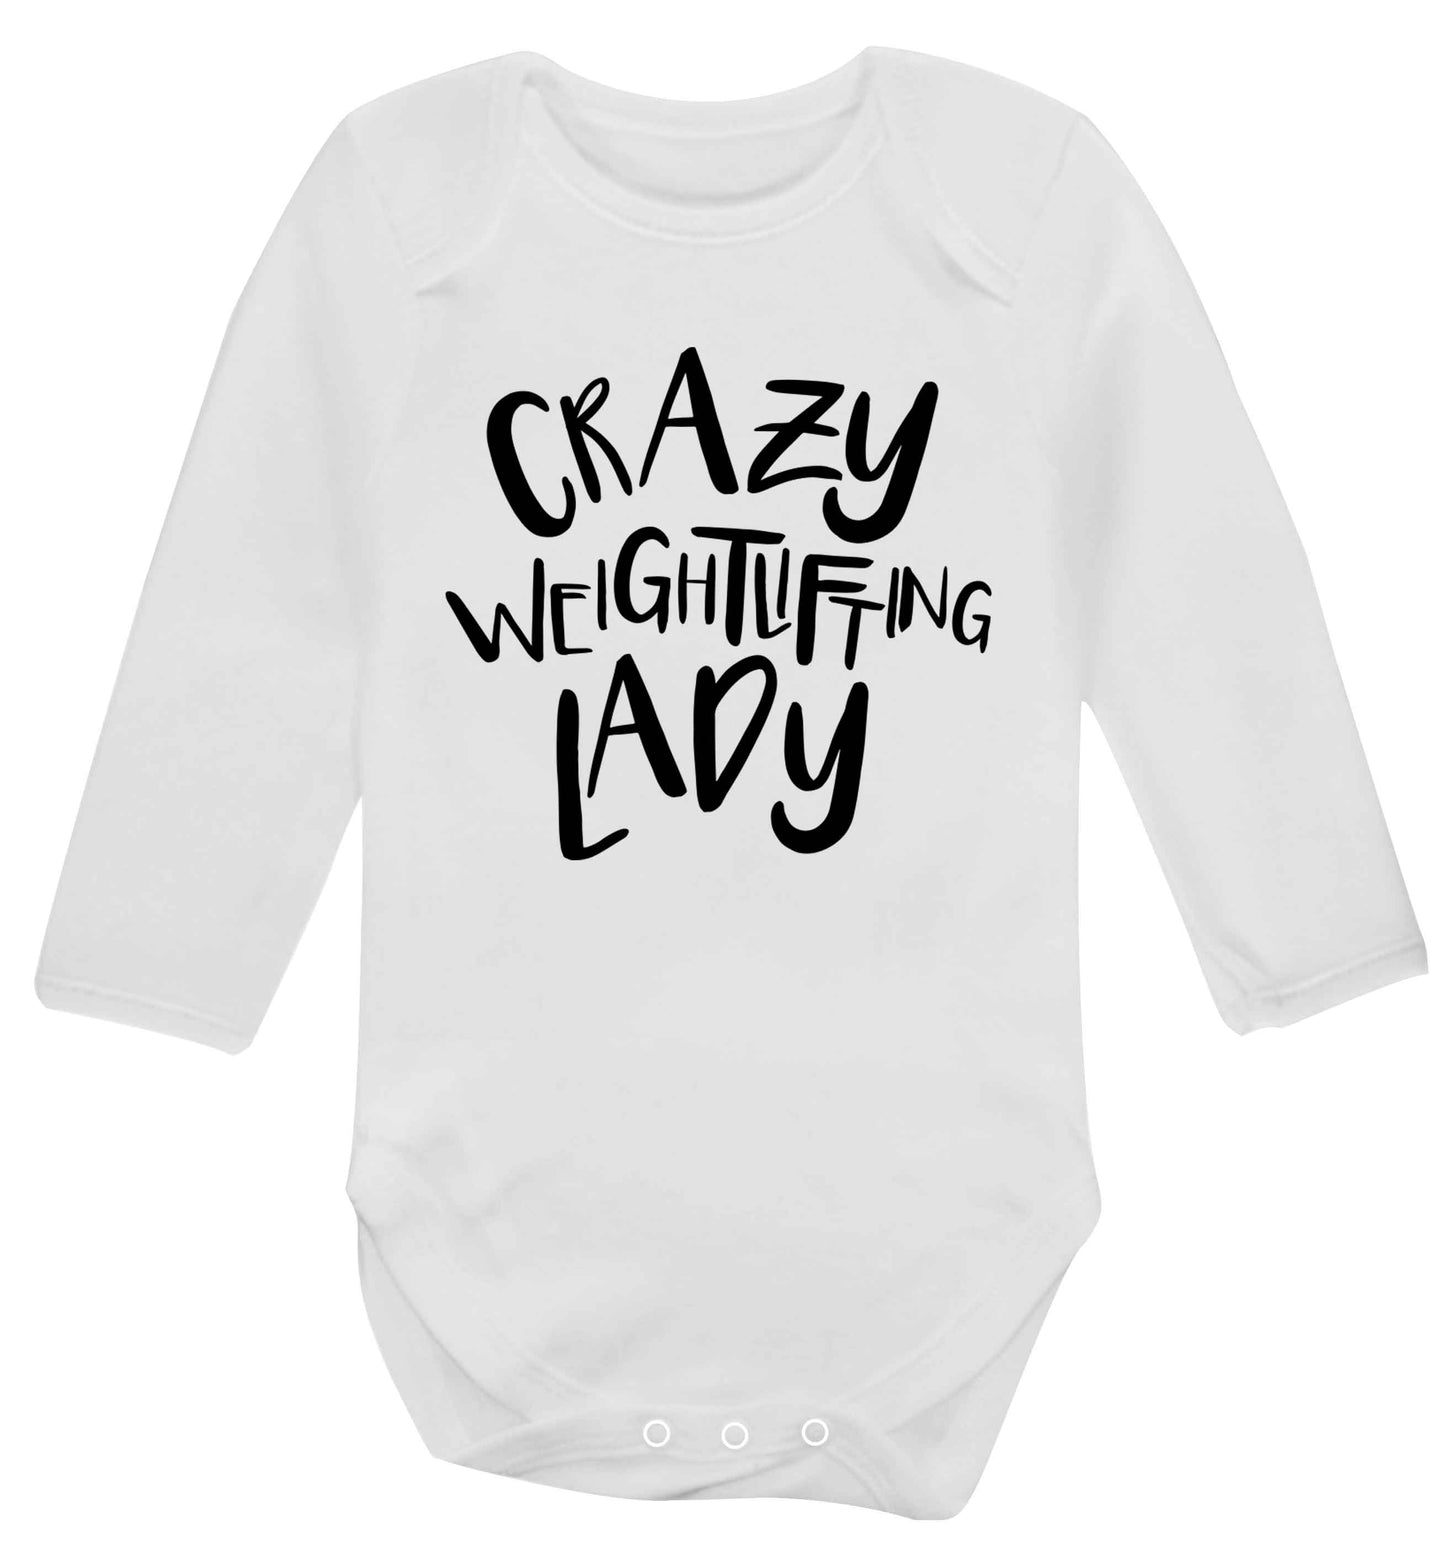 Crazy weightlifting lady Baby Vest long sleeved white 6-12 months